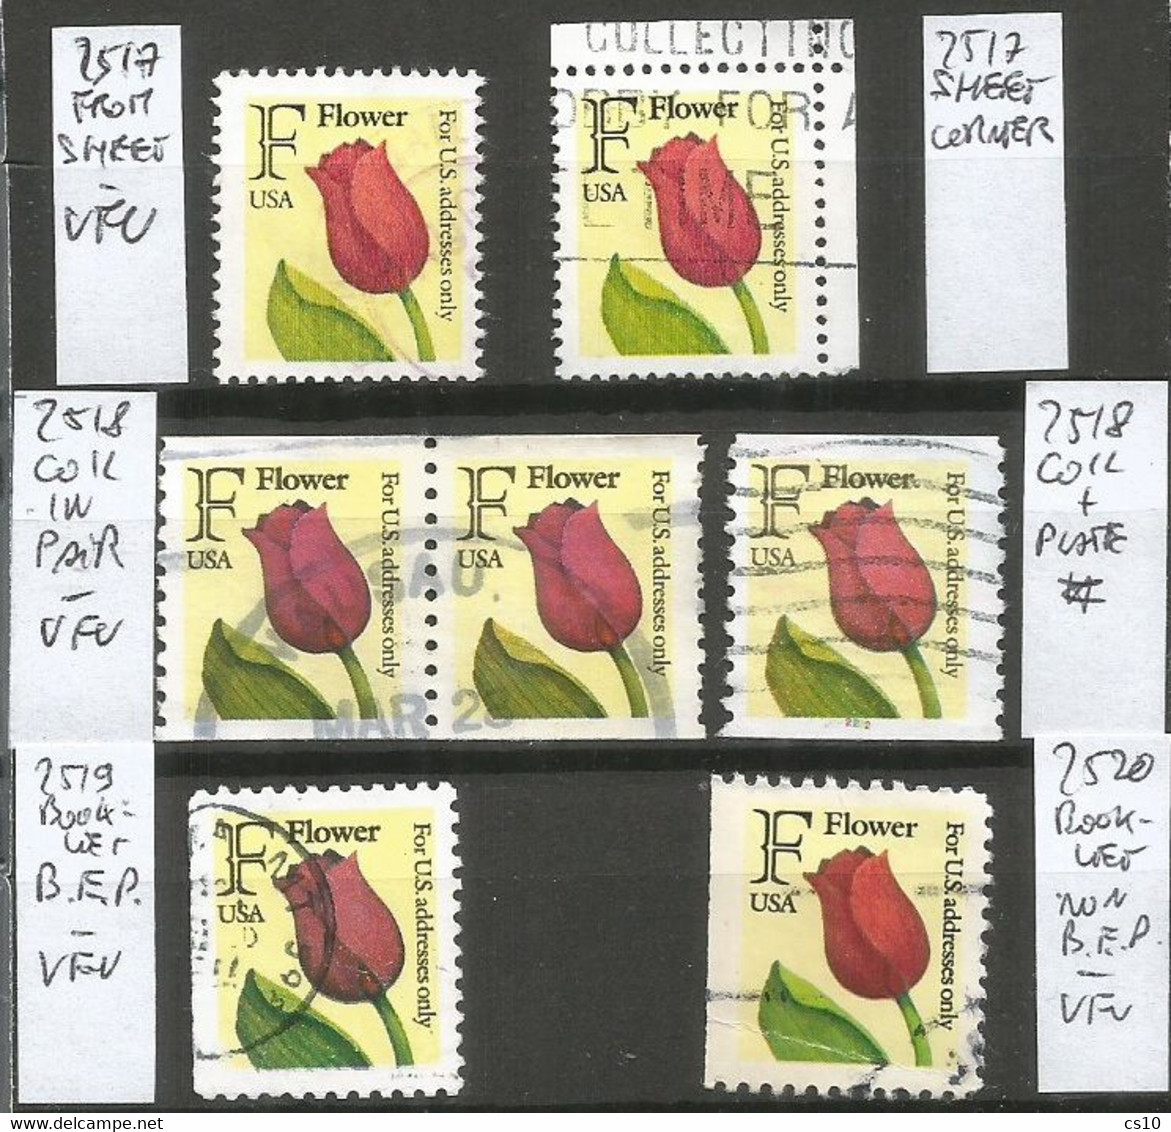 USA 1991 Tulip "F" Rate SC.#2517/20 Cpl 4+2v Set : Sheet + Corner, Coil + Table #, Booklet Perf Block+ Line - Mainly VFU - Roulettes